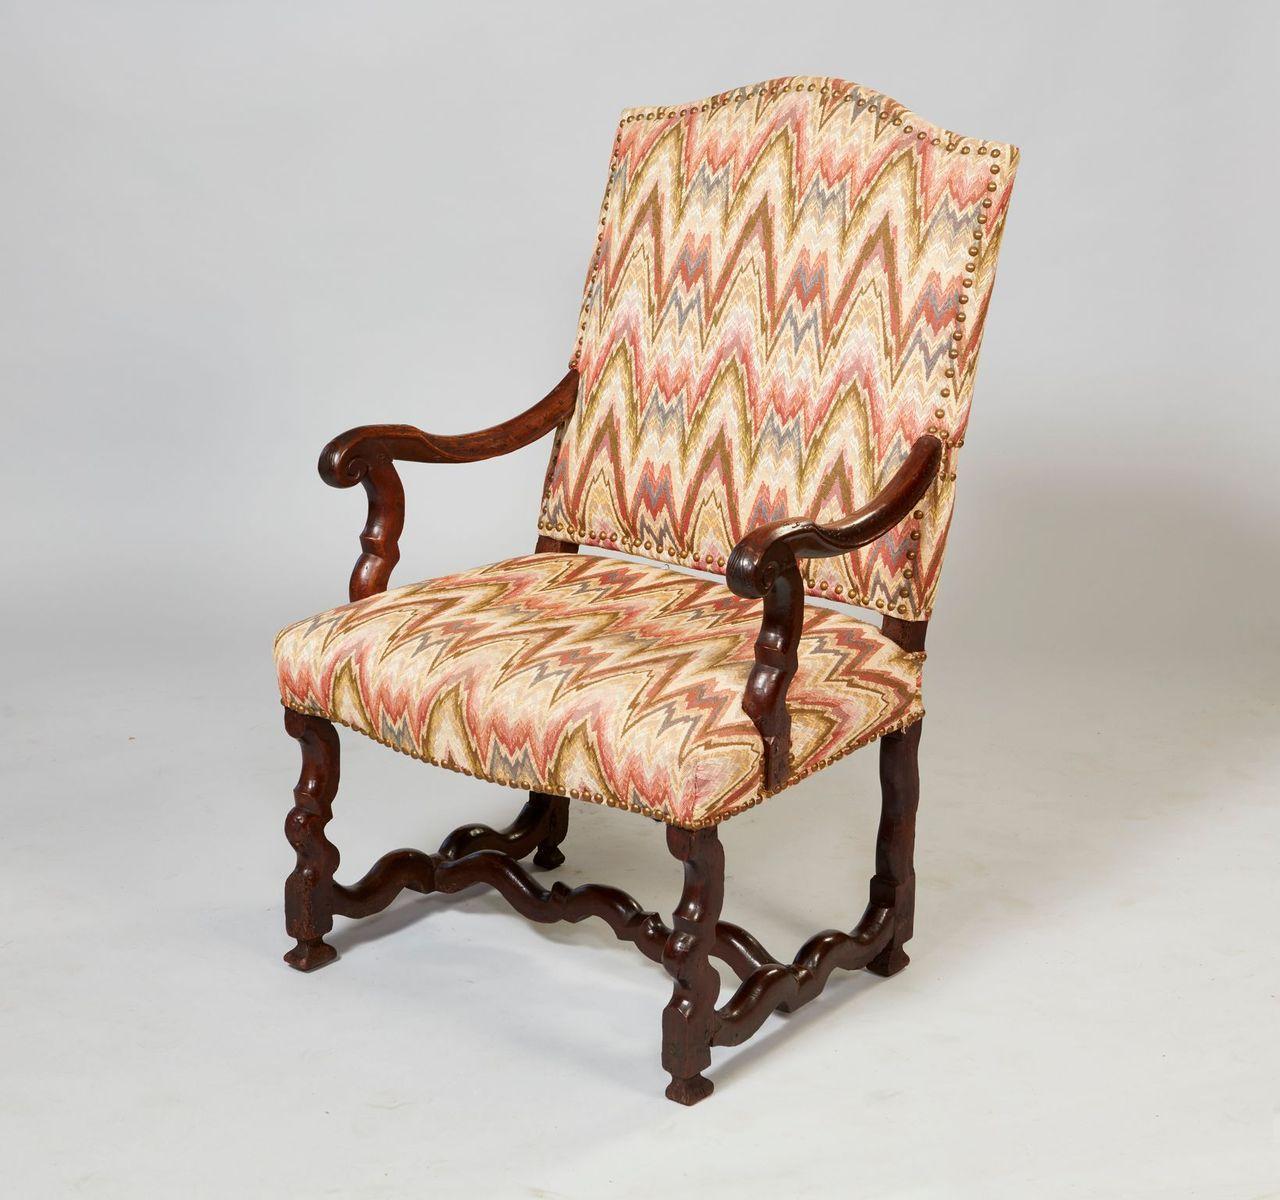 Good early 18th Century Franco-Flemish walnut armchair with arched upholstered back over shaped arms and upholstered seat over